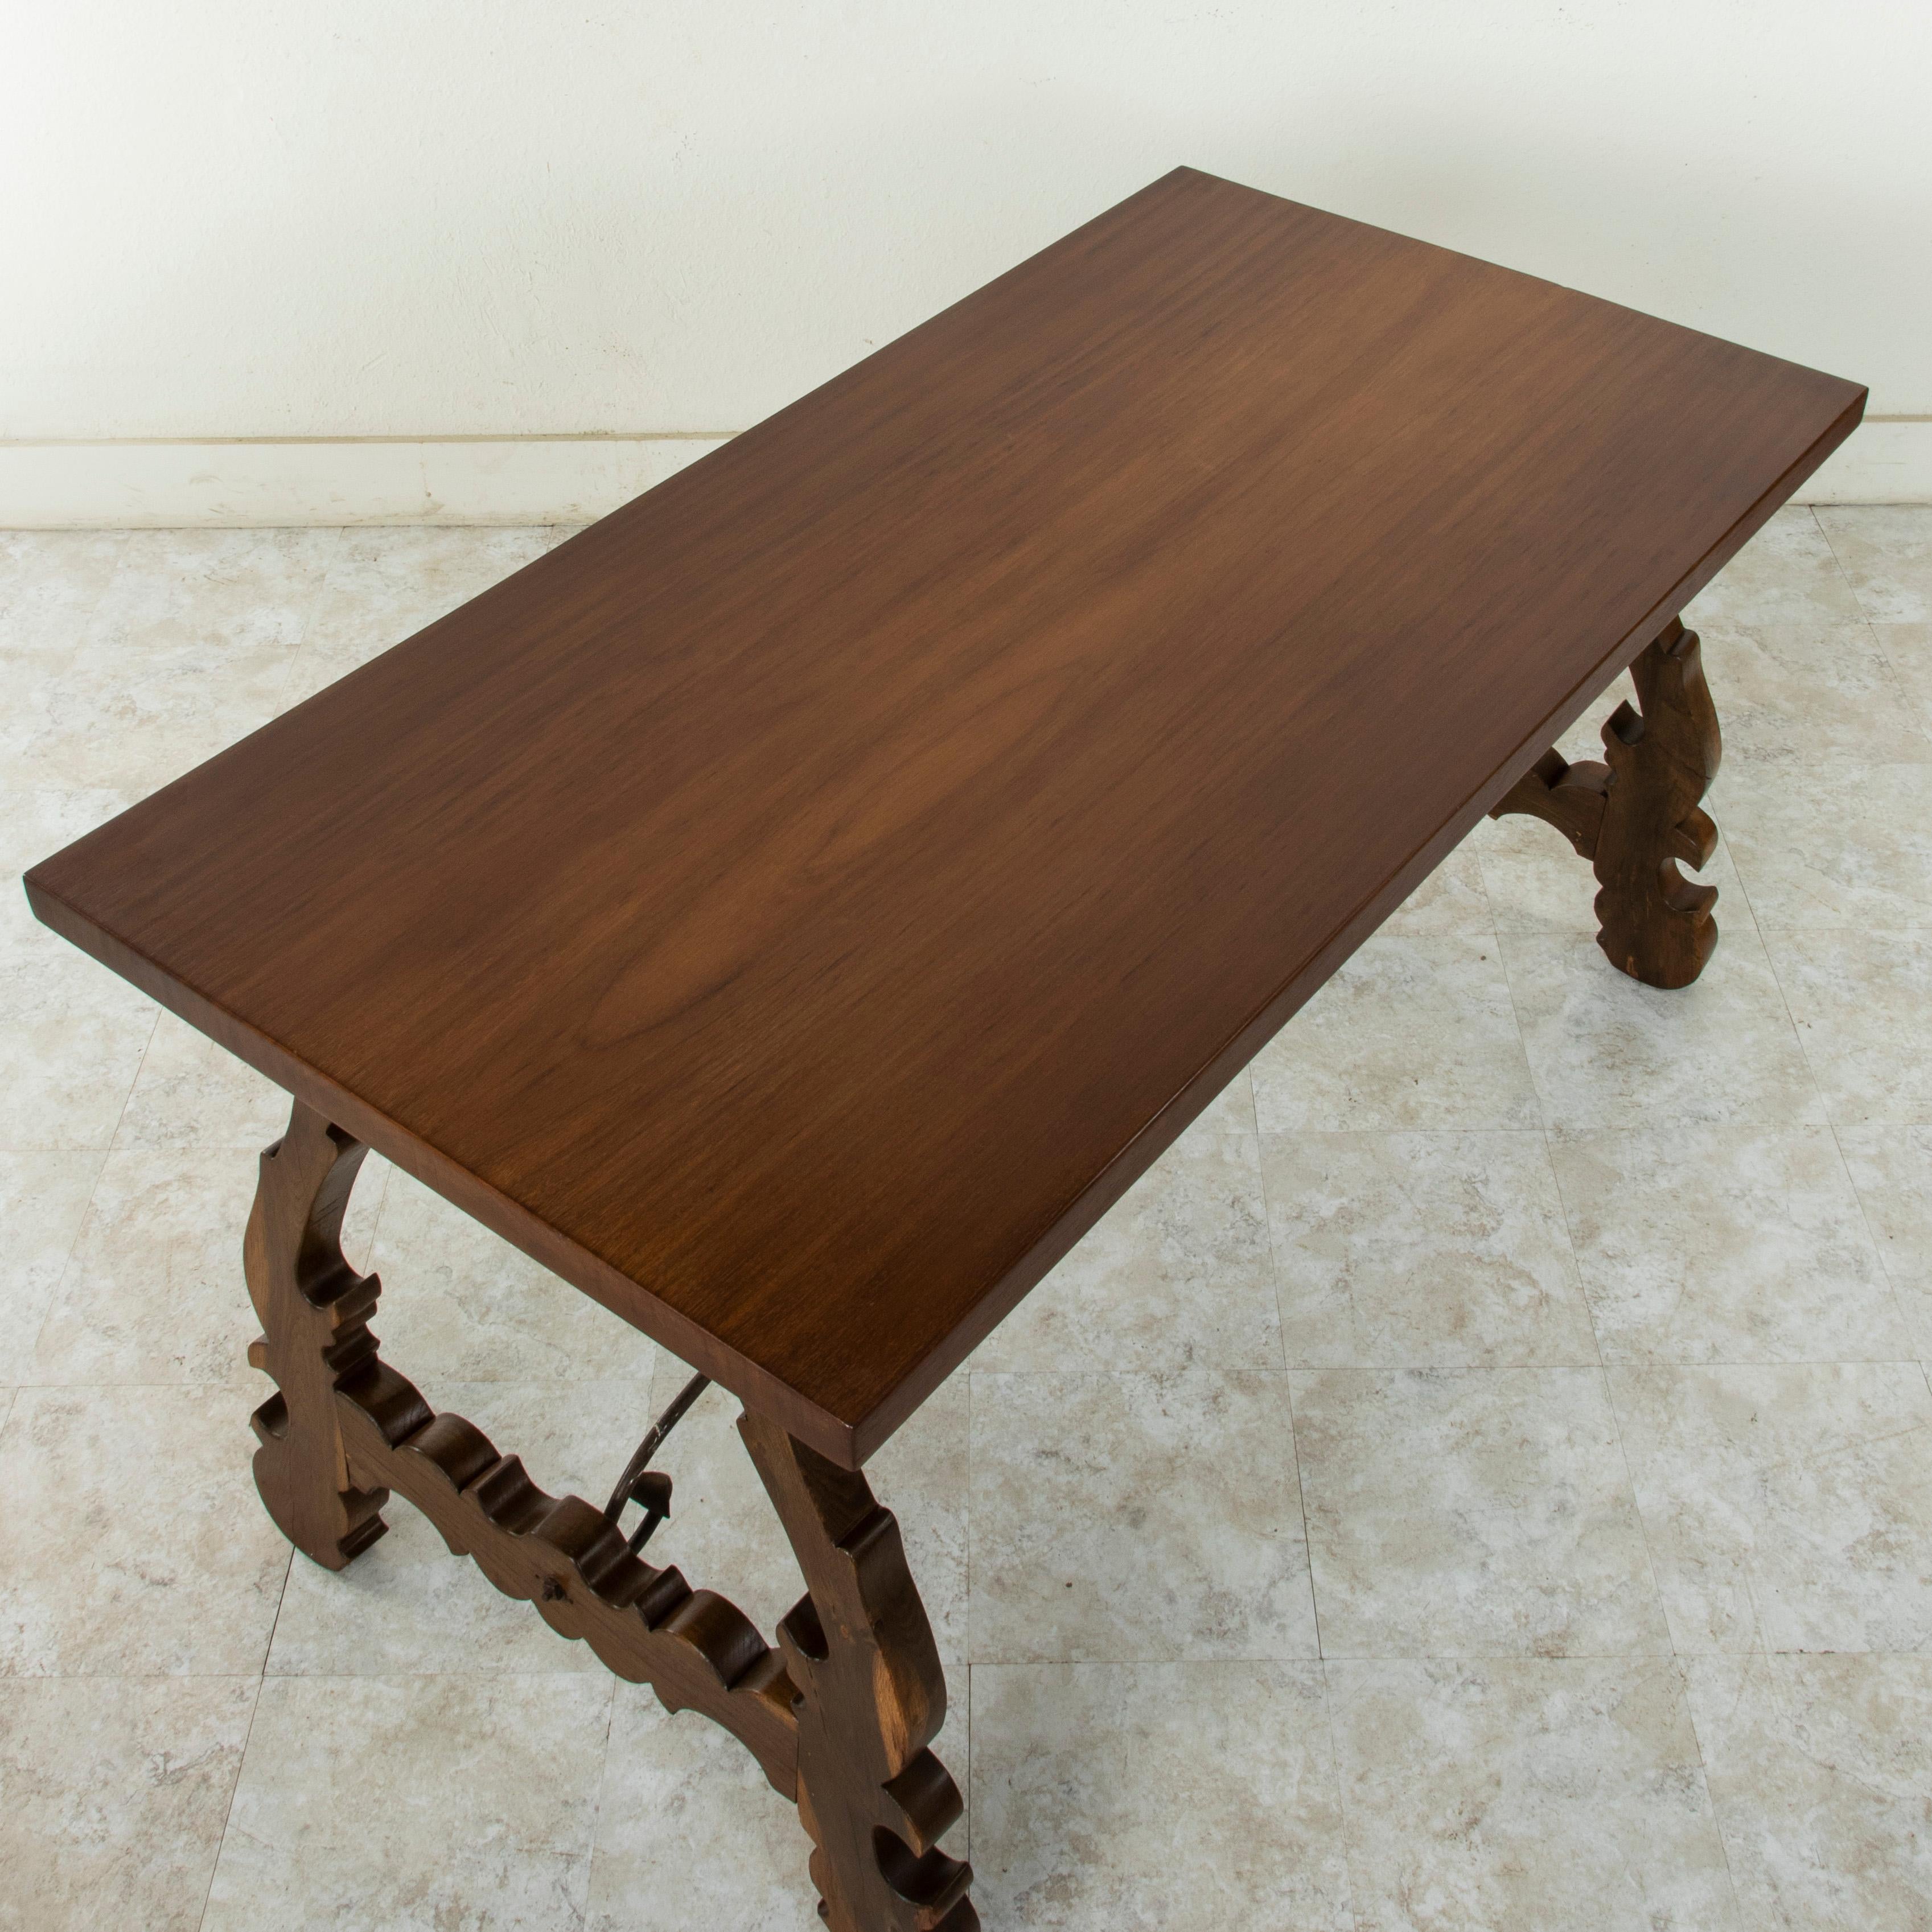 Early 20th Century Artisan-Made Spanish Renaissance Writing Table with Single Plank Amaranth Top